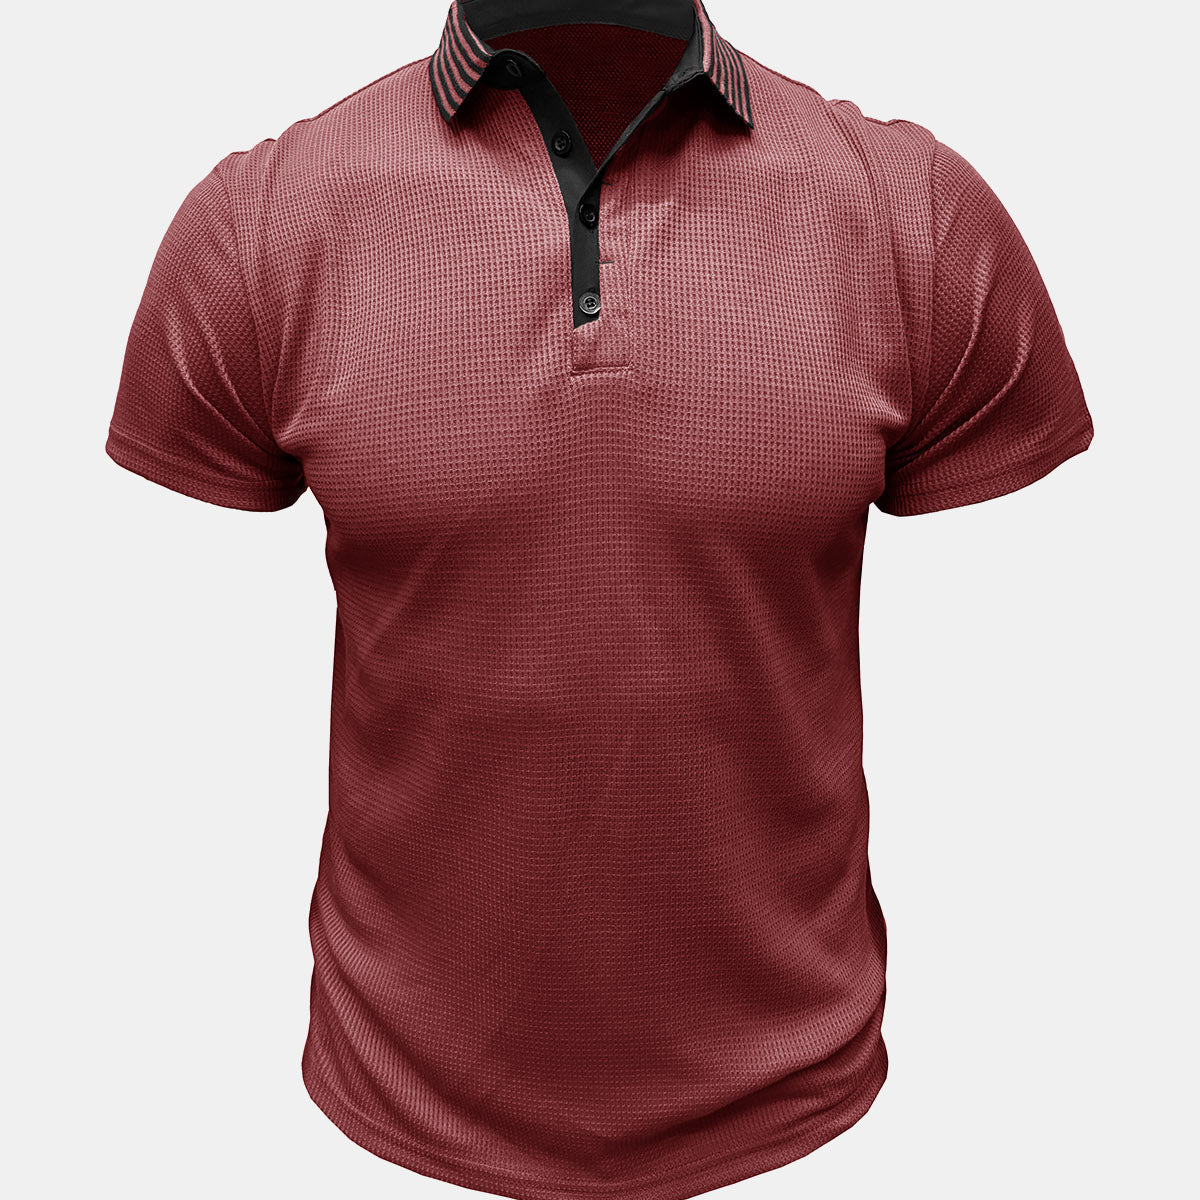 Men's Solid Color Leisure Short Sleeve Summer Polo Shirt